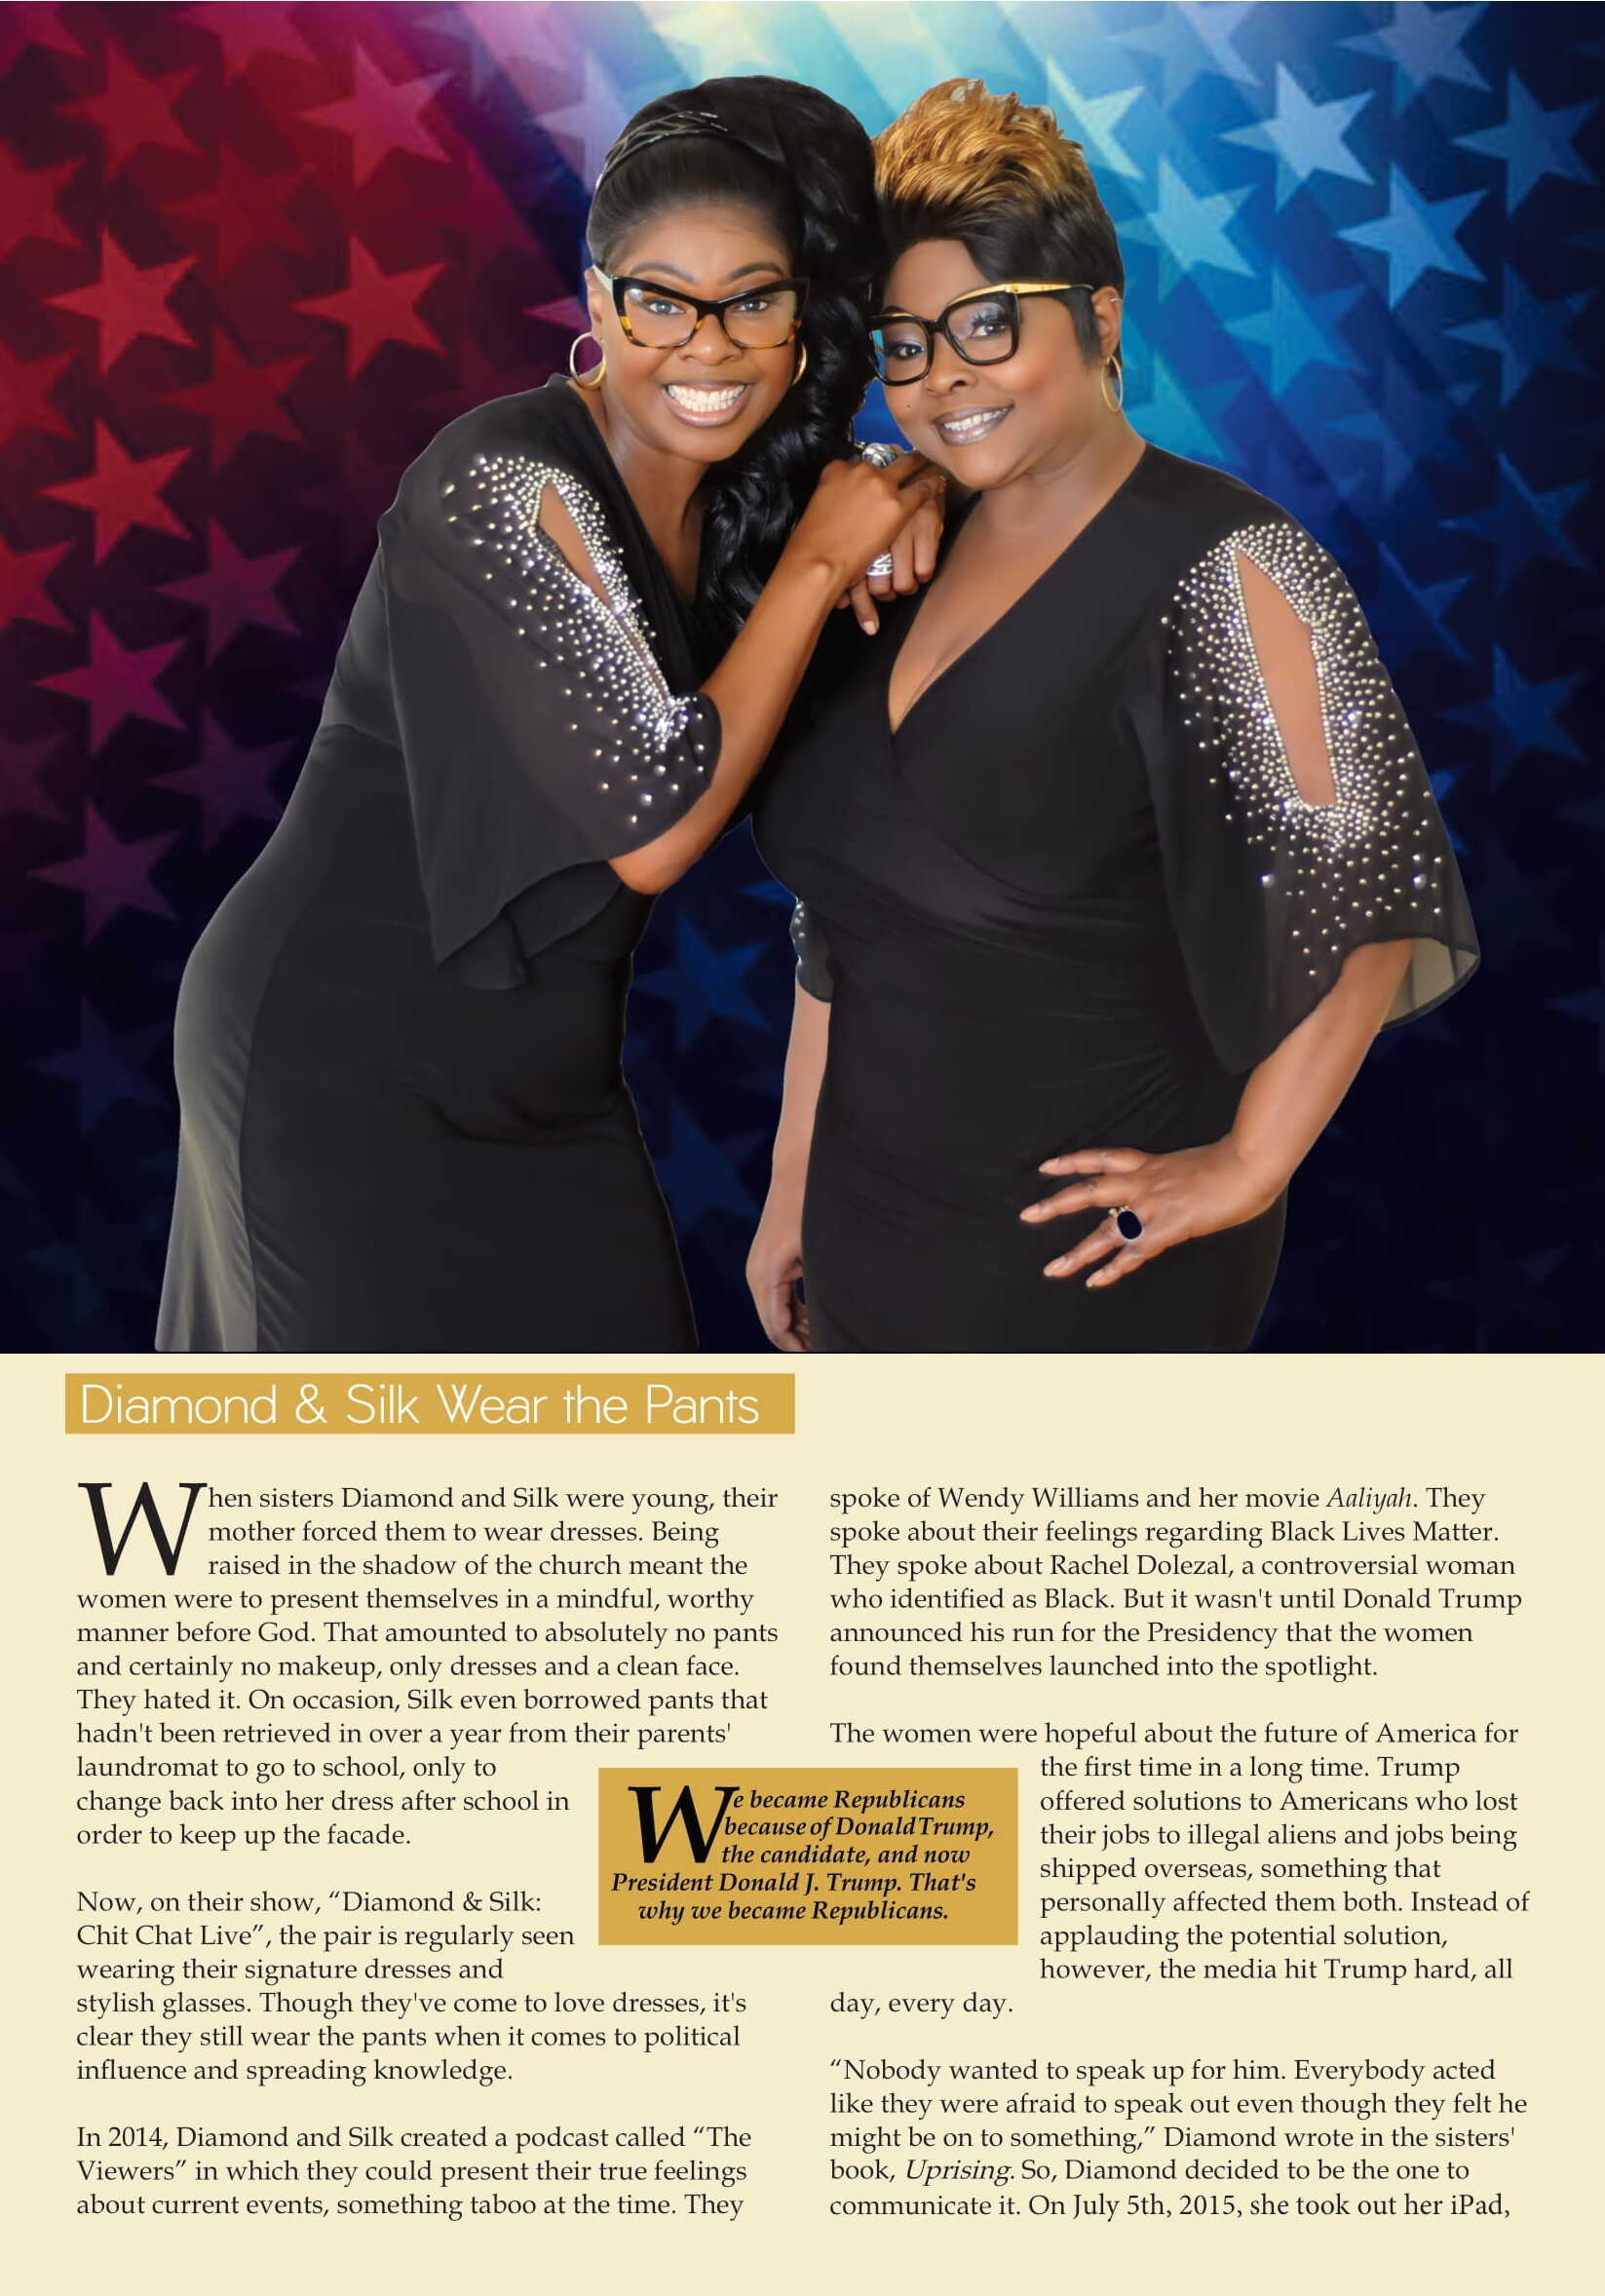 Diamond & Silk Wear the Pants: How Two Sisters Fought Censorship and Took the Internet by Storm  at george magazine